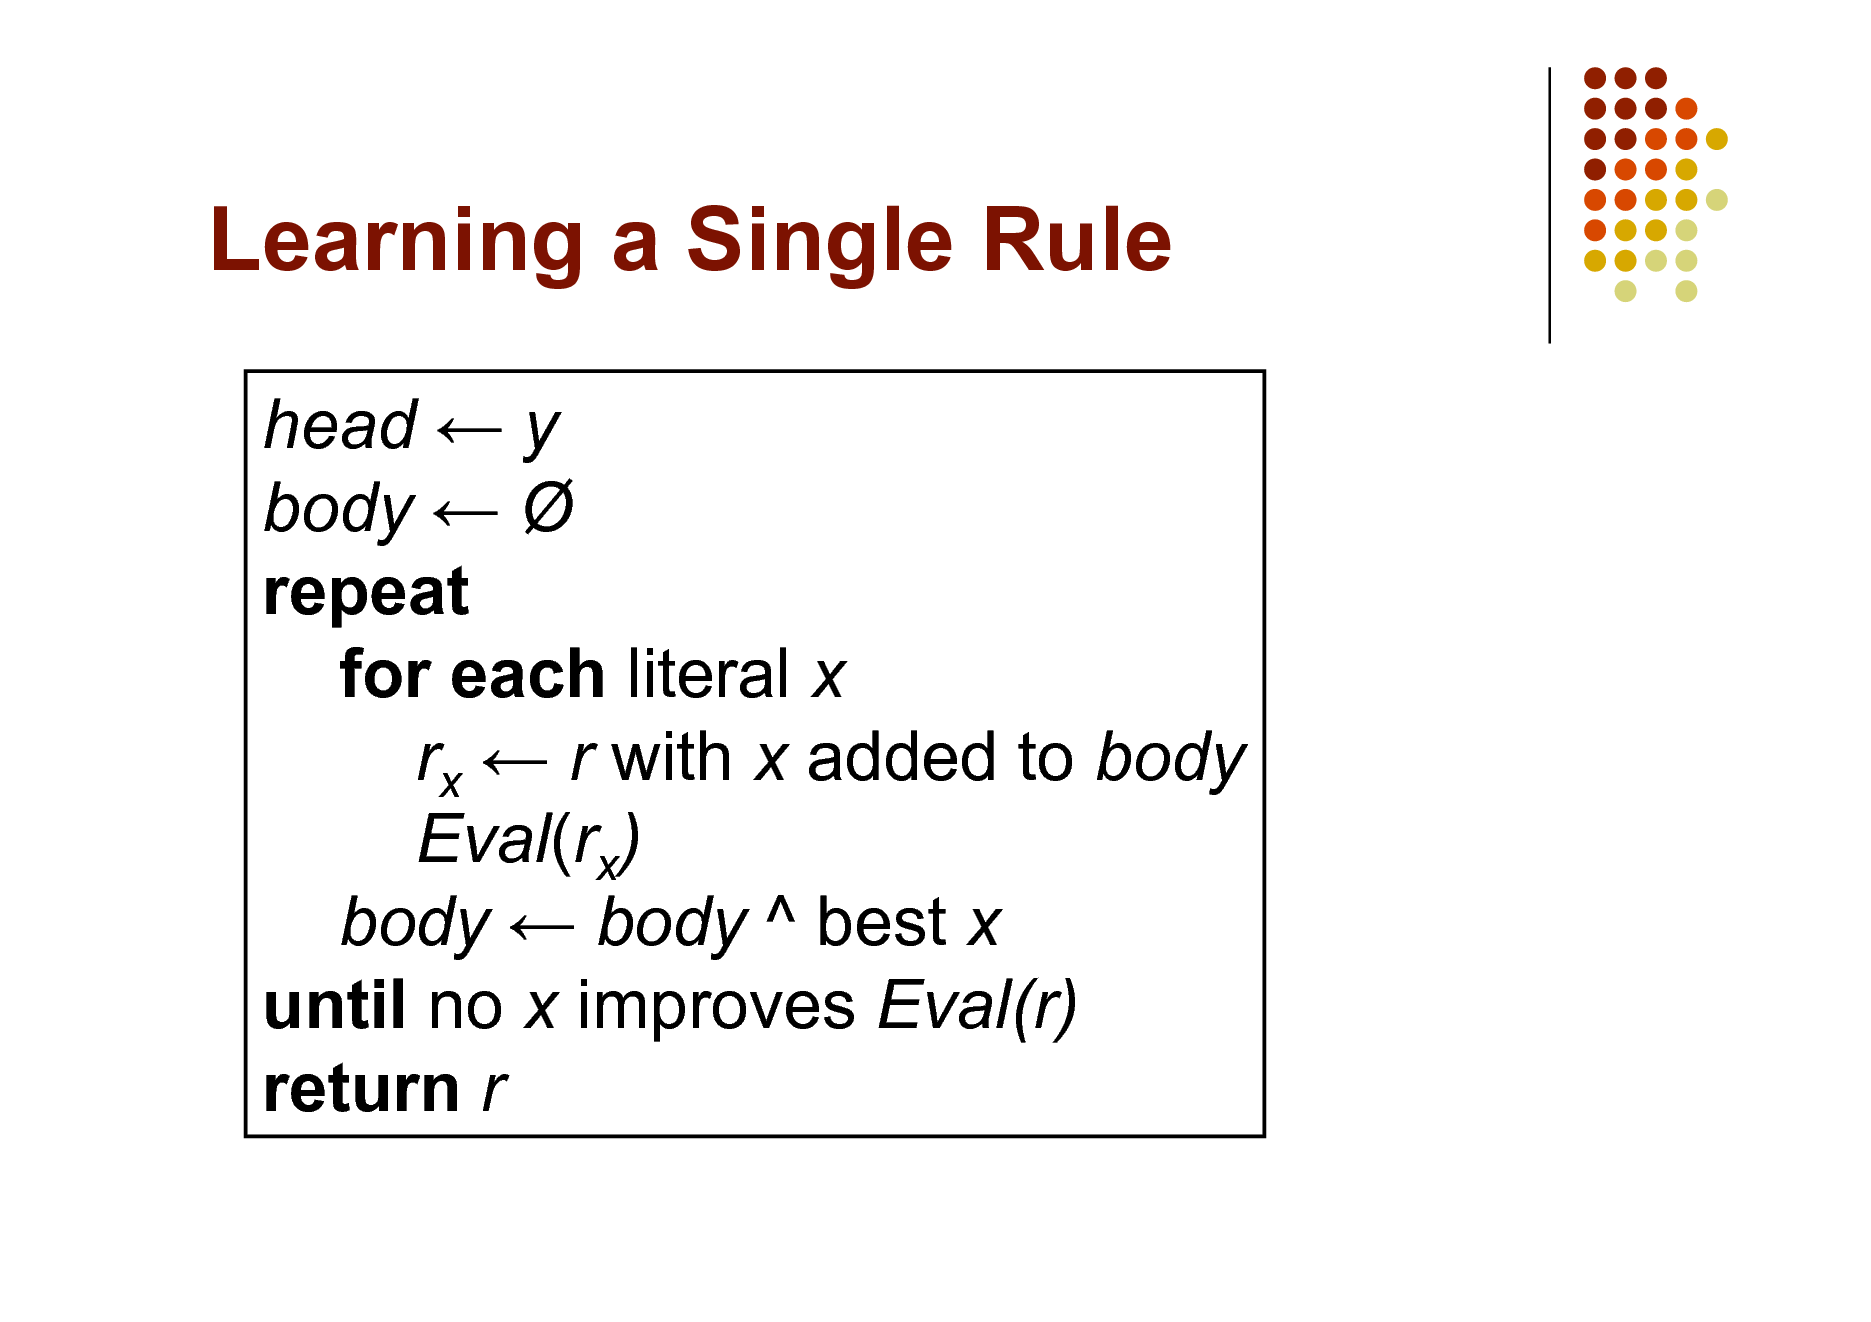 Slide: Learning a Single Rule
head  y body   repeat for each literal x rx  r with x added to body Eval(rx) body  body ^ best x until no x improves Eval(r) return r

